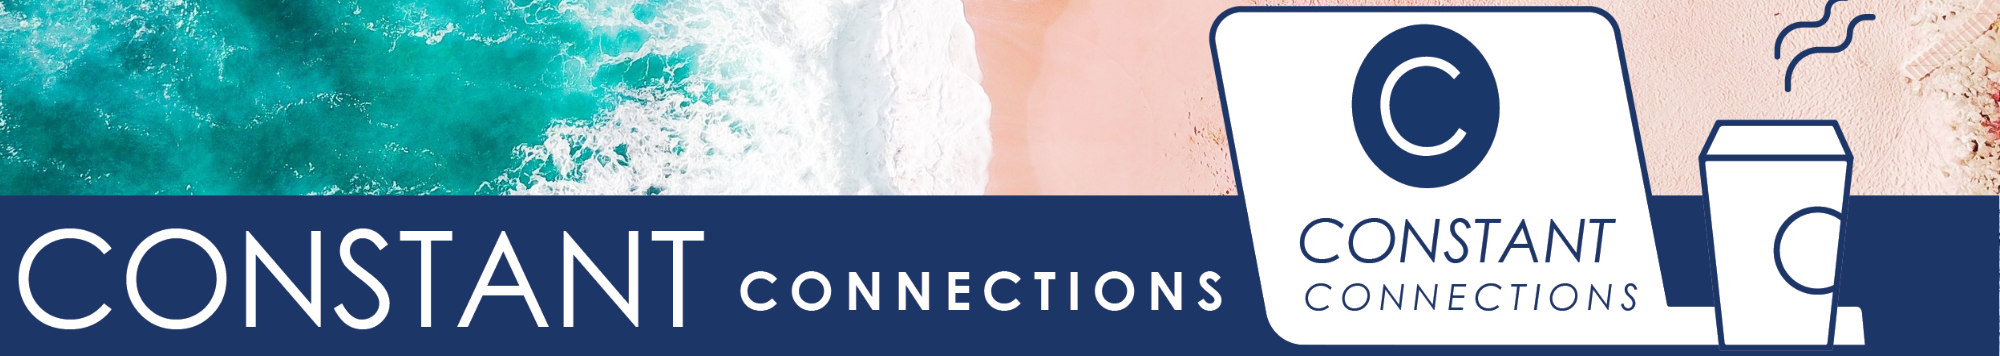 Navy blue title saying "CONSTANT Connections" with a white laptop featuring a CONSTANT circular C logo. Background is beach waves.